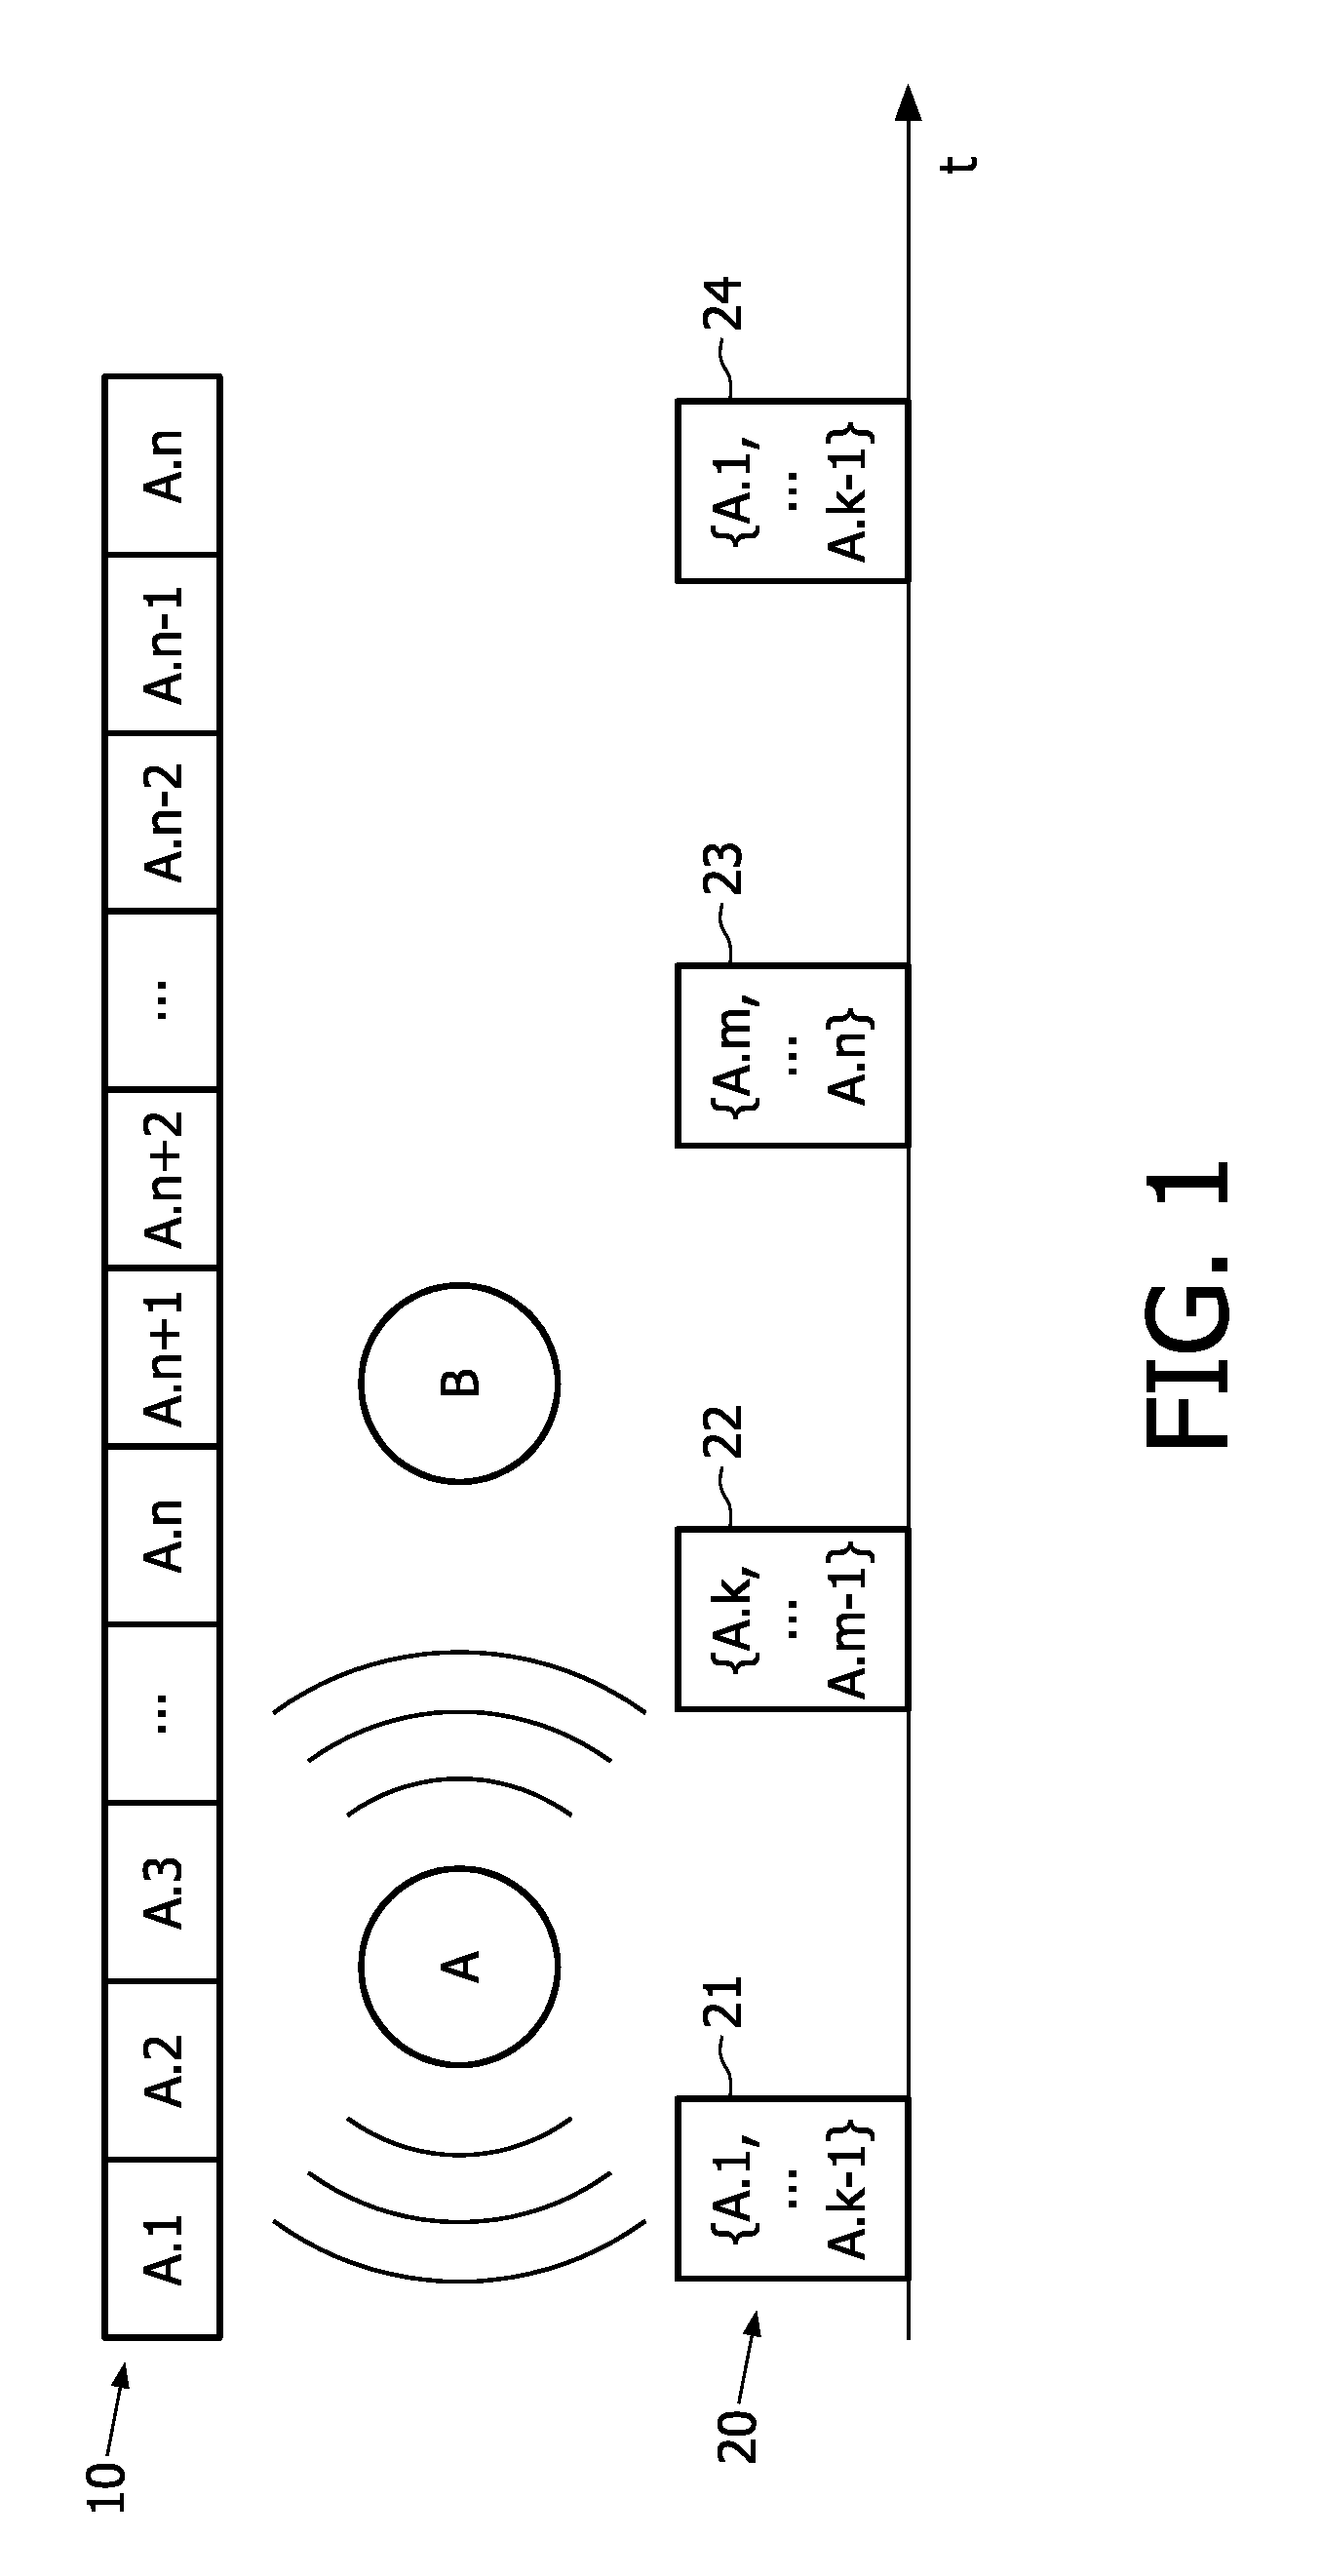 Method of generating report messages in a network